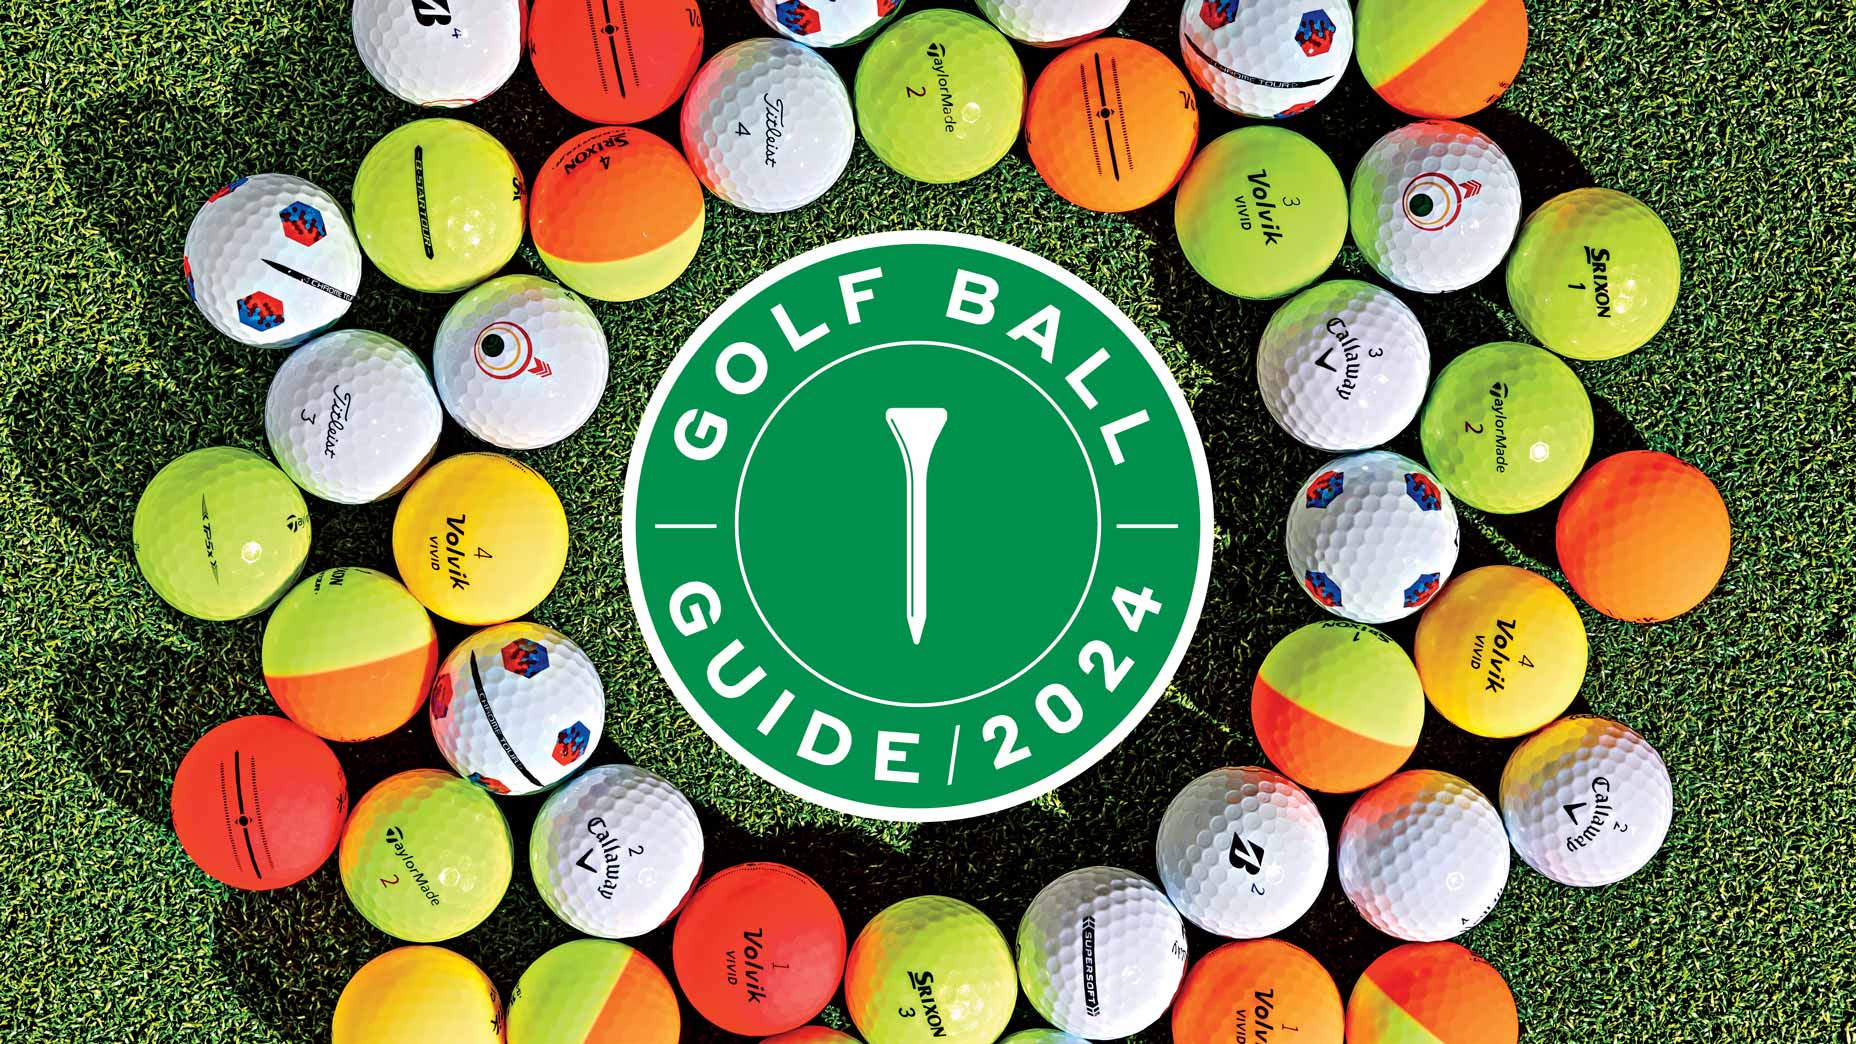 Dozens of golf balls arranged in a circle on grass with a Golf Ball Guide logo in the middle